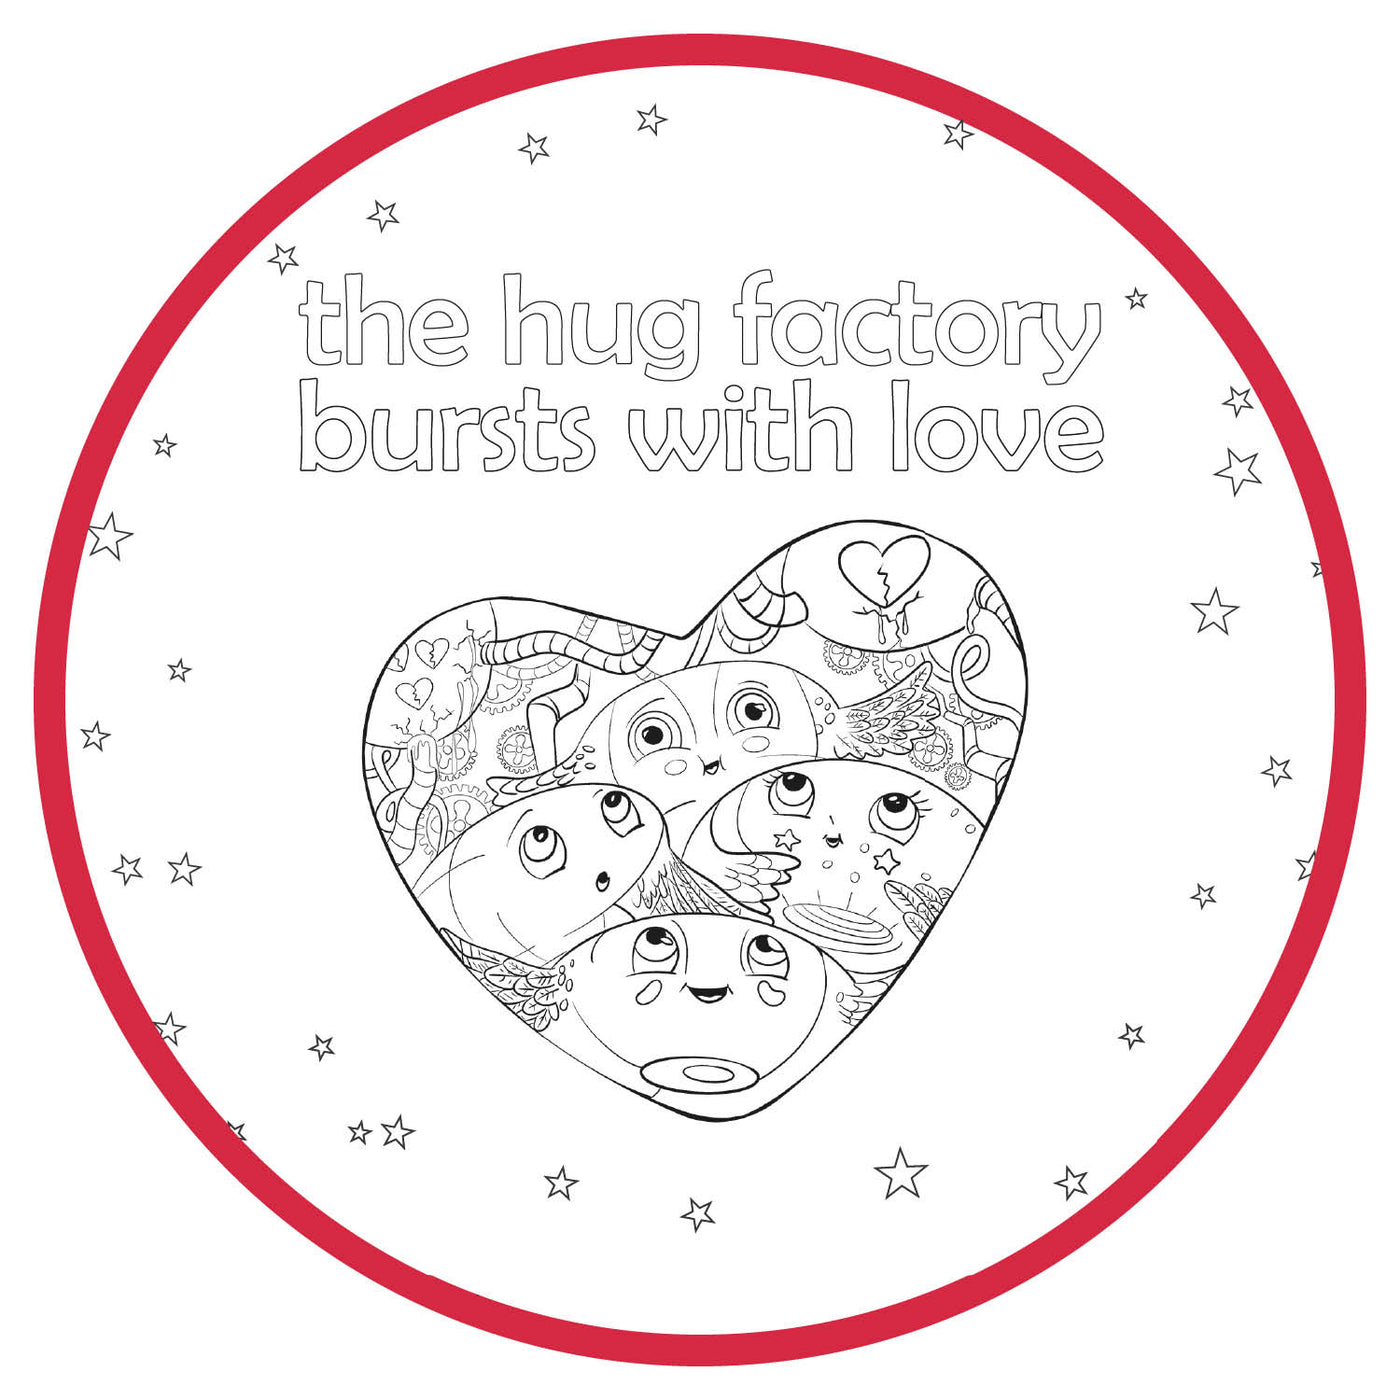 Printable Coloring Pages - The Hug Factory Bursts with Love